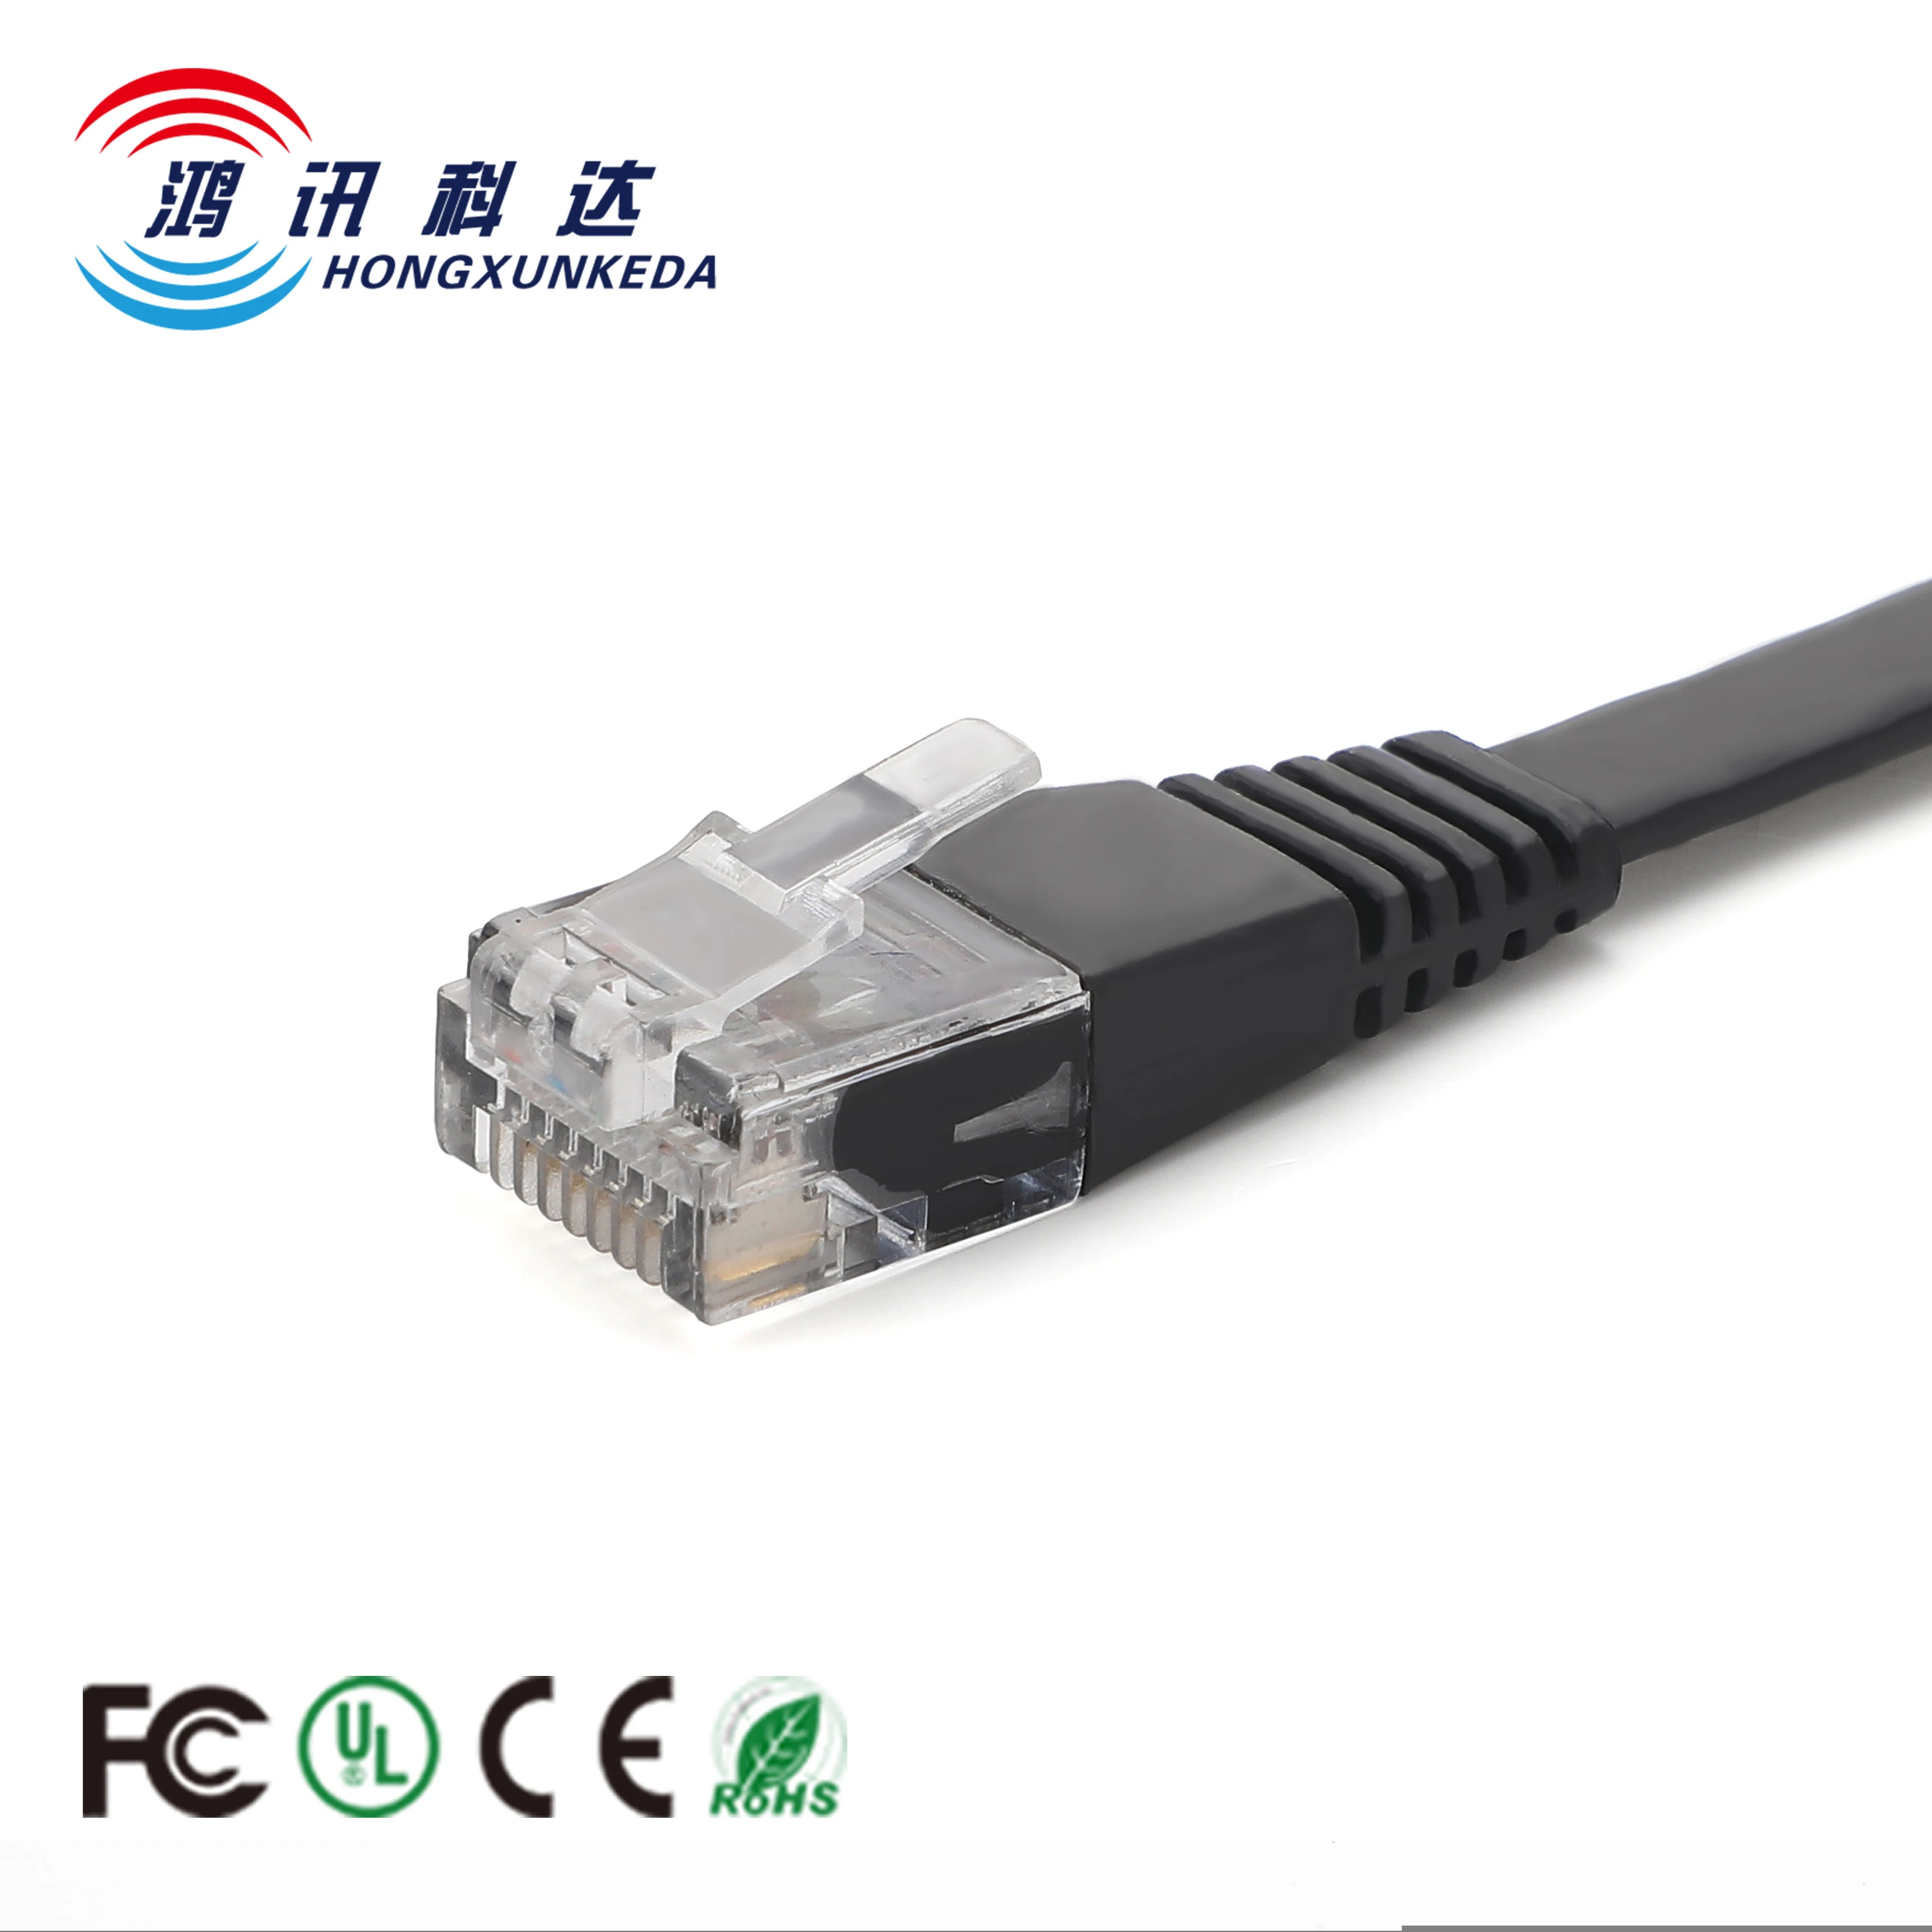 Flat Network Cable CAT6 Ethernet Ultra-thin Patch Cable Communication Cables